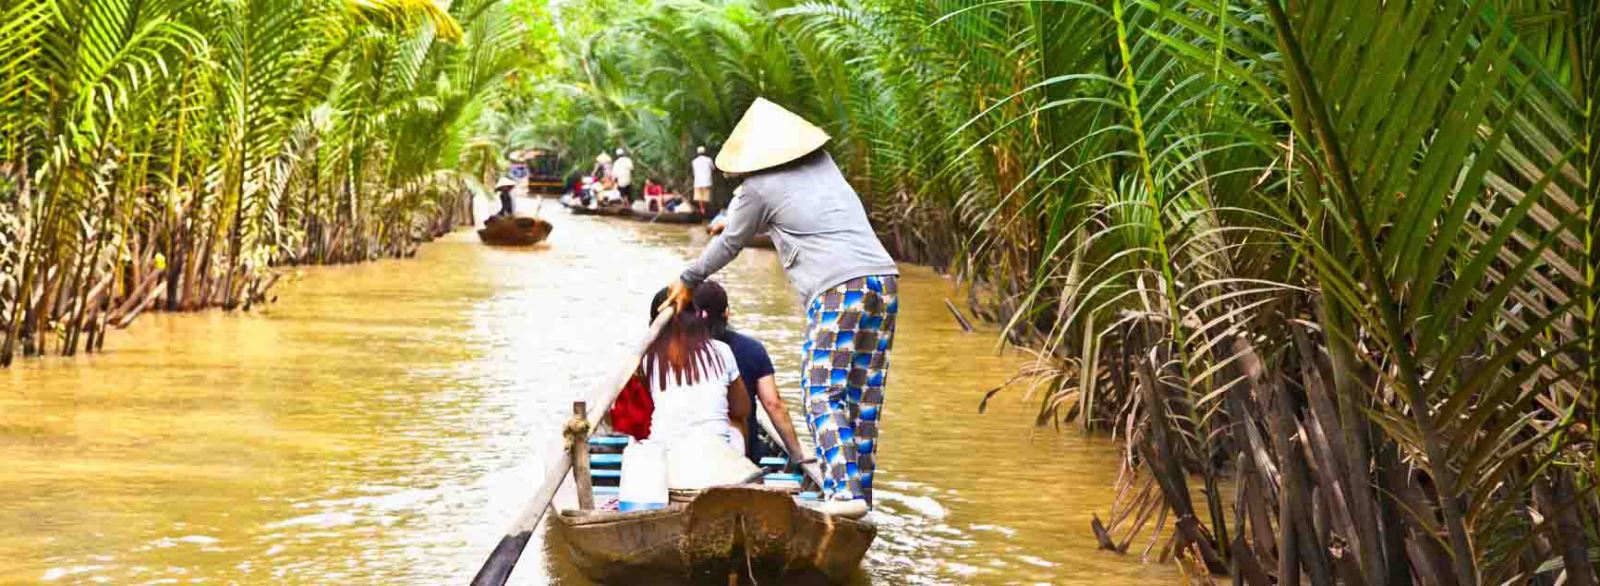 canoe excursions in the orchards of the Mekong Delta.